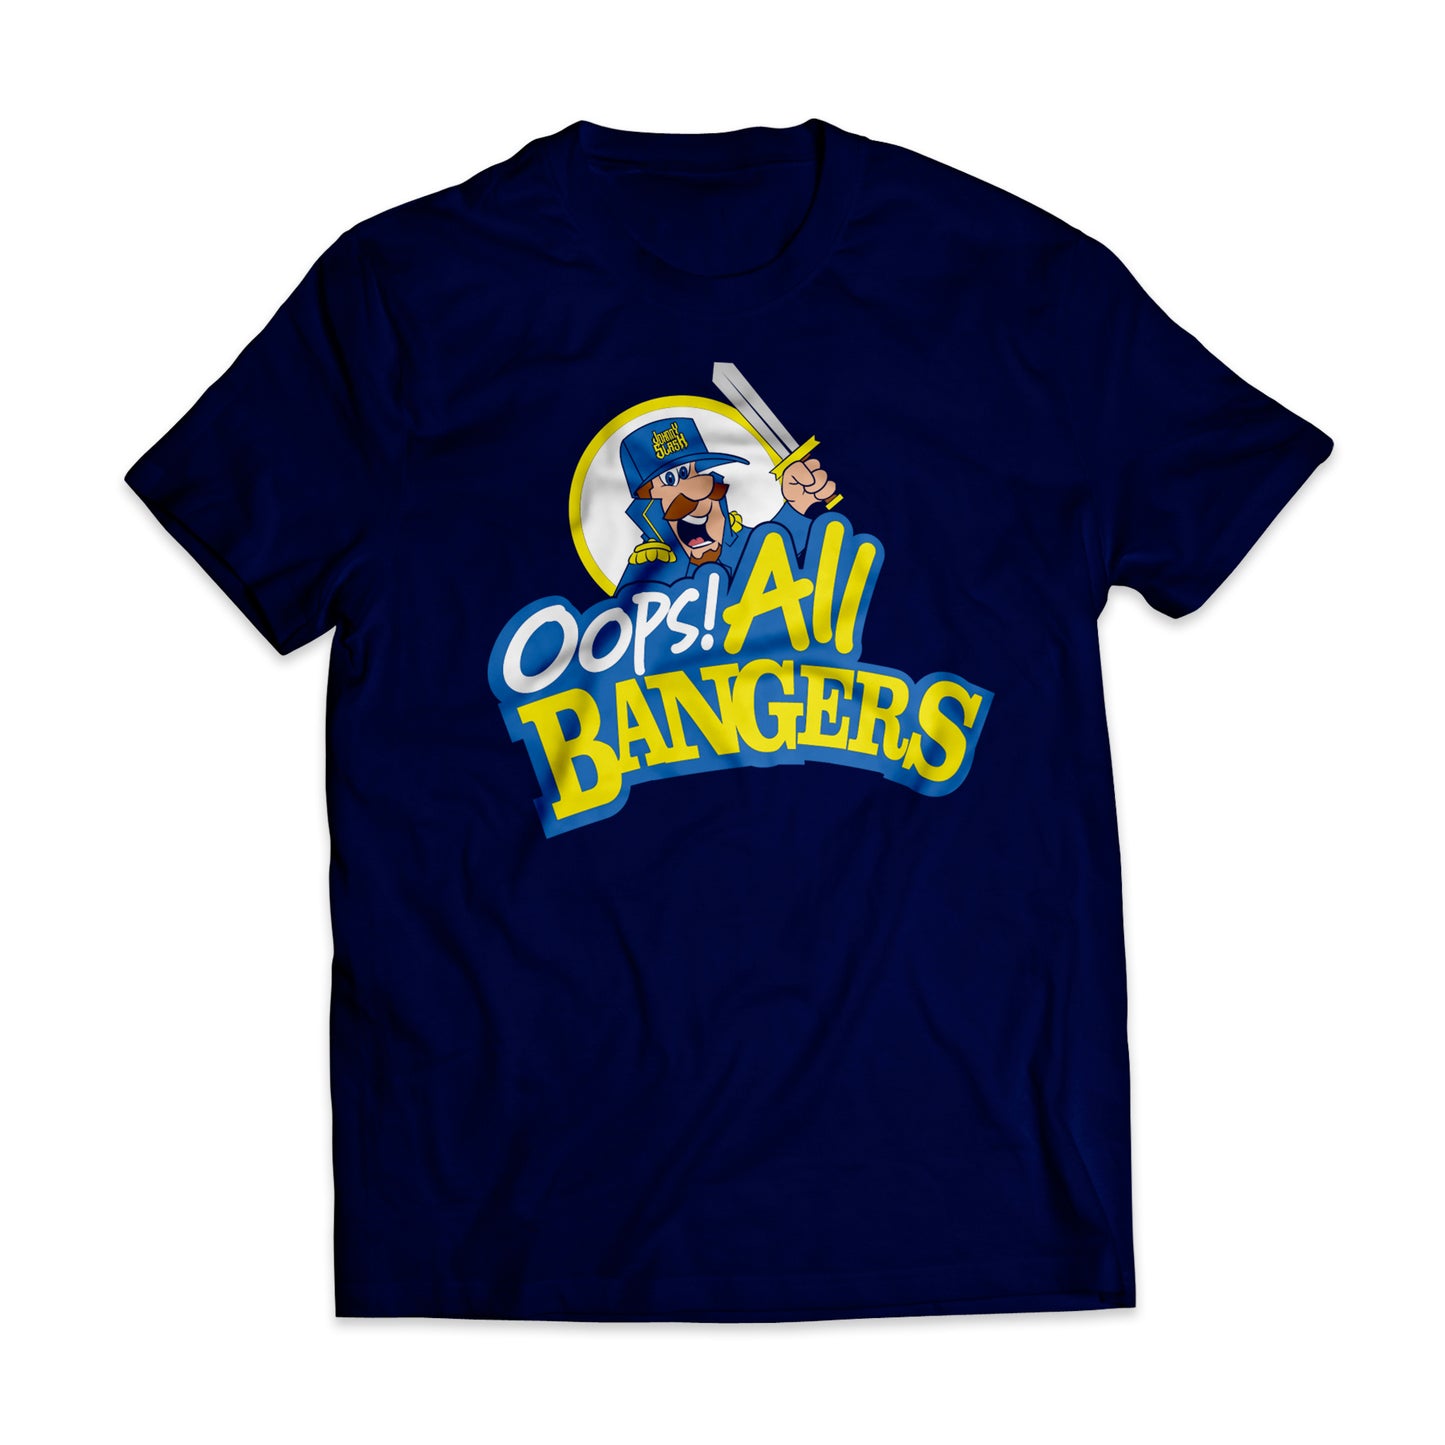 "Oops! All Bangers" Shirt